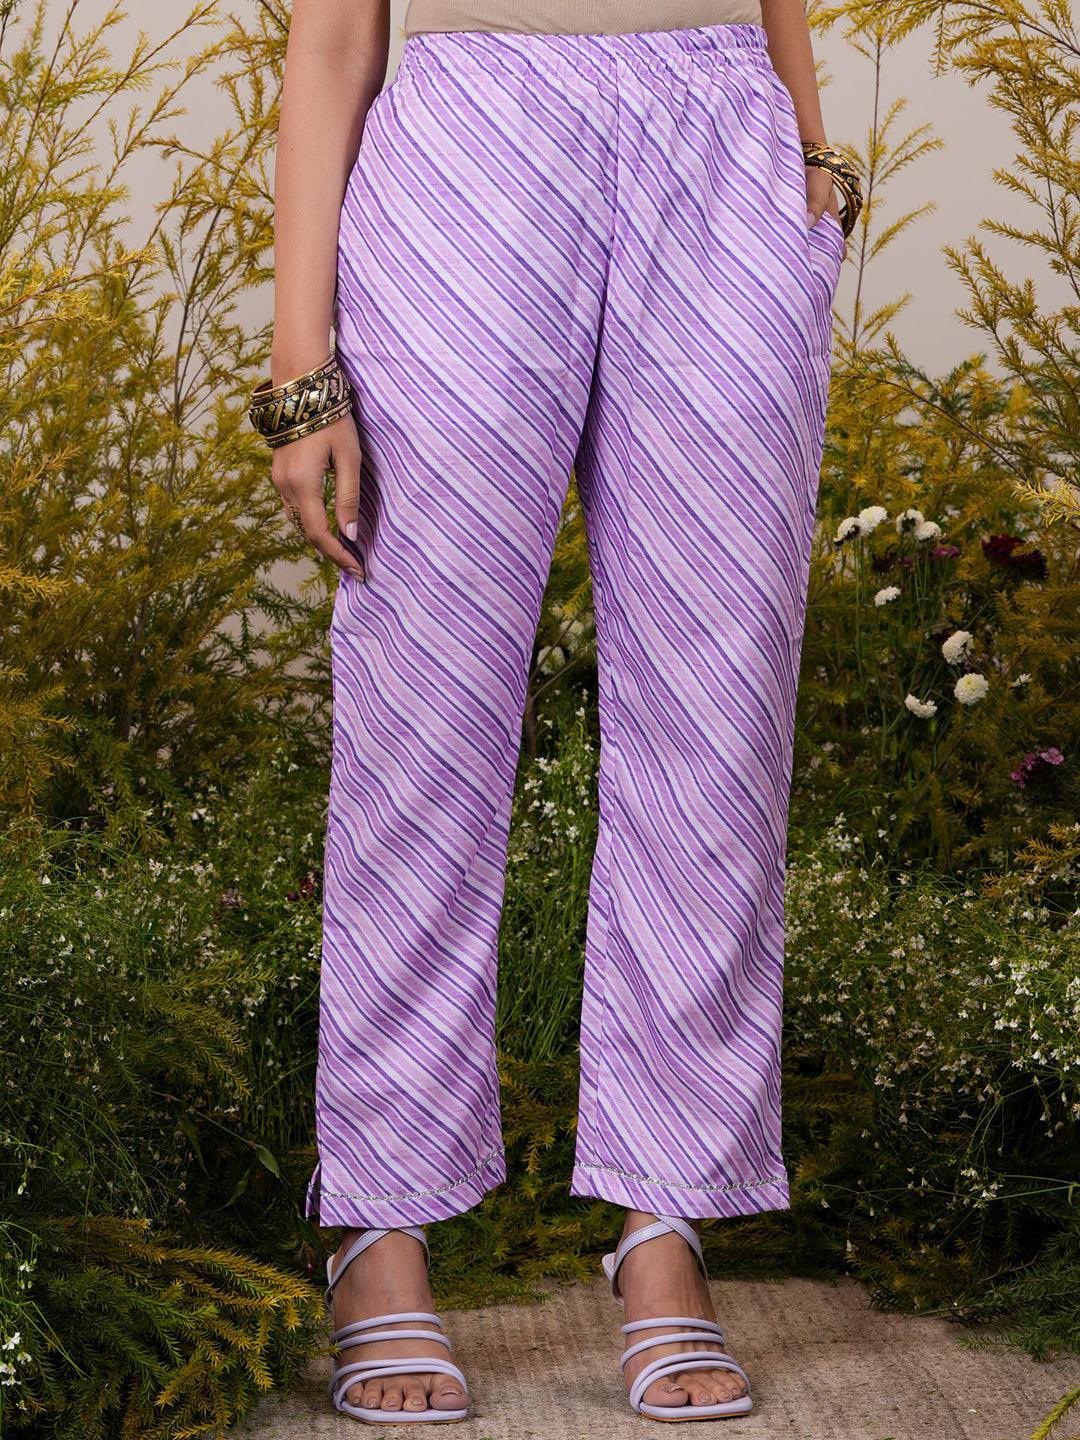 Lavender Printed Cotton Straight Suit With Dupatta - Libas